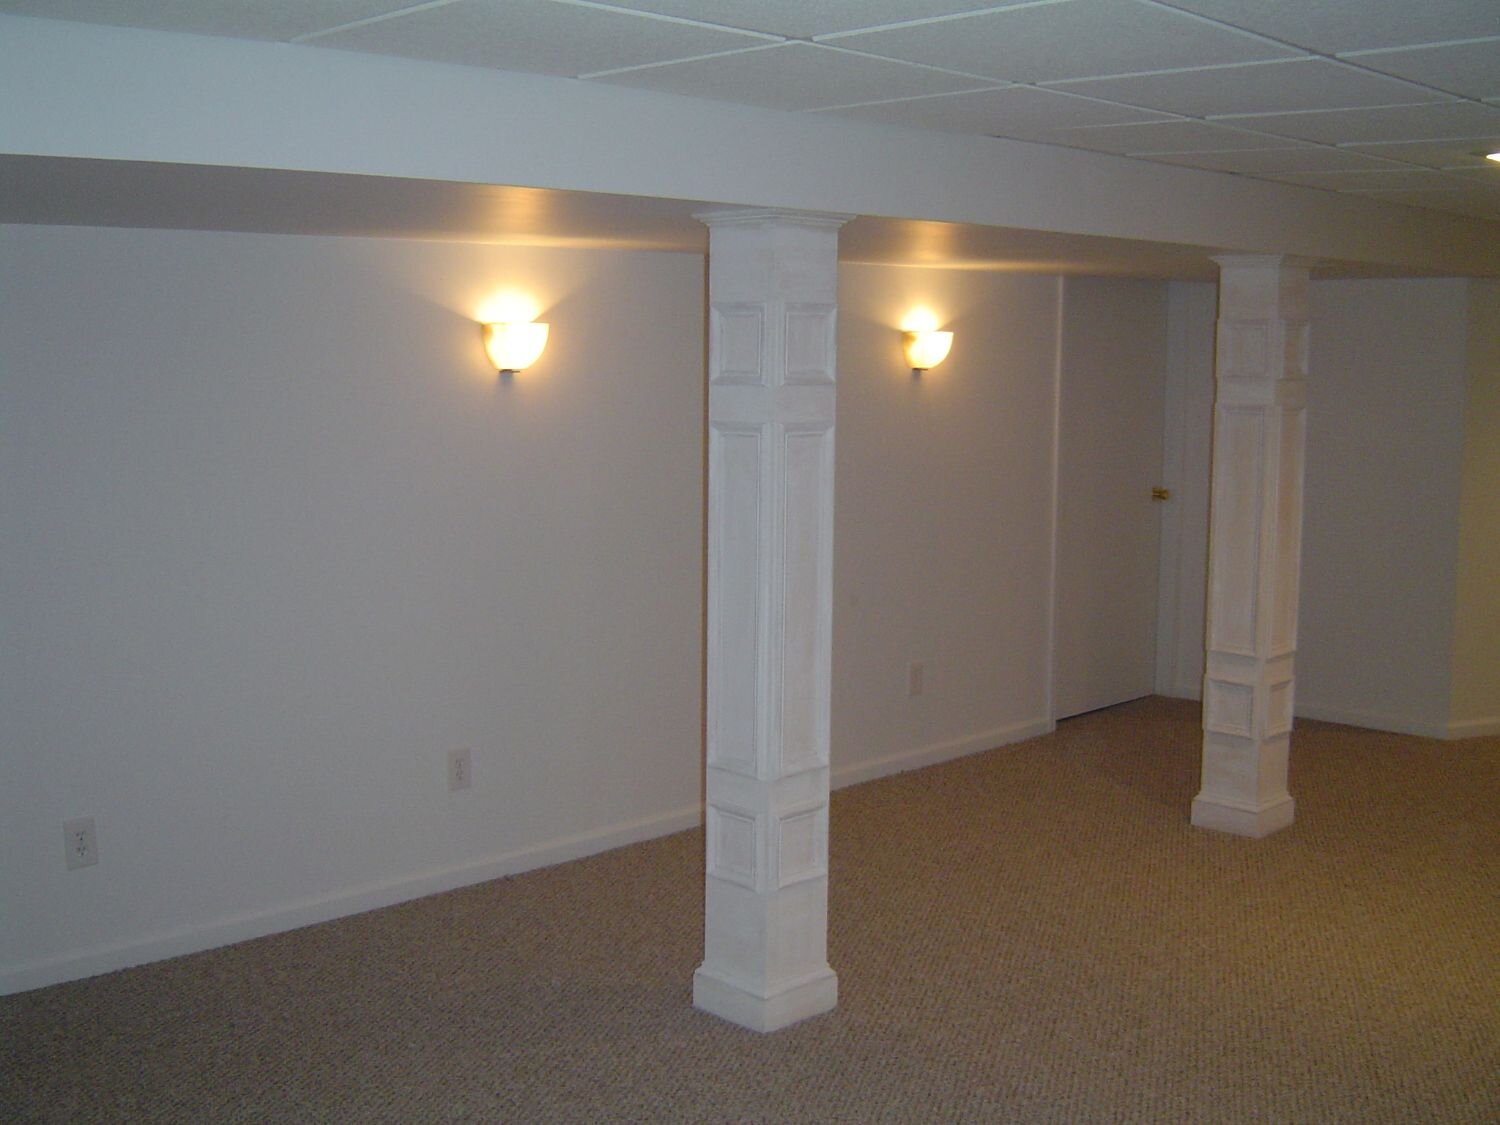  Beam and lolly columns enclosed to create decorative open space. 